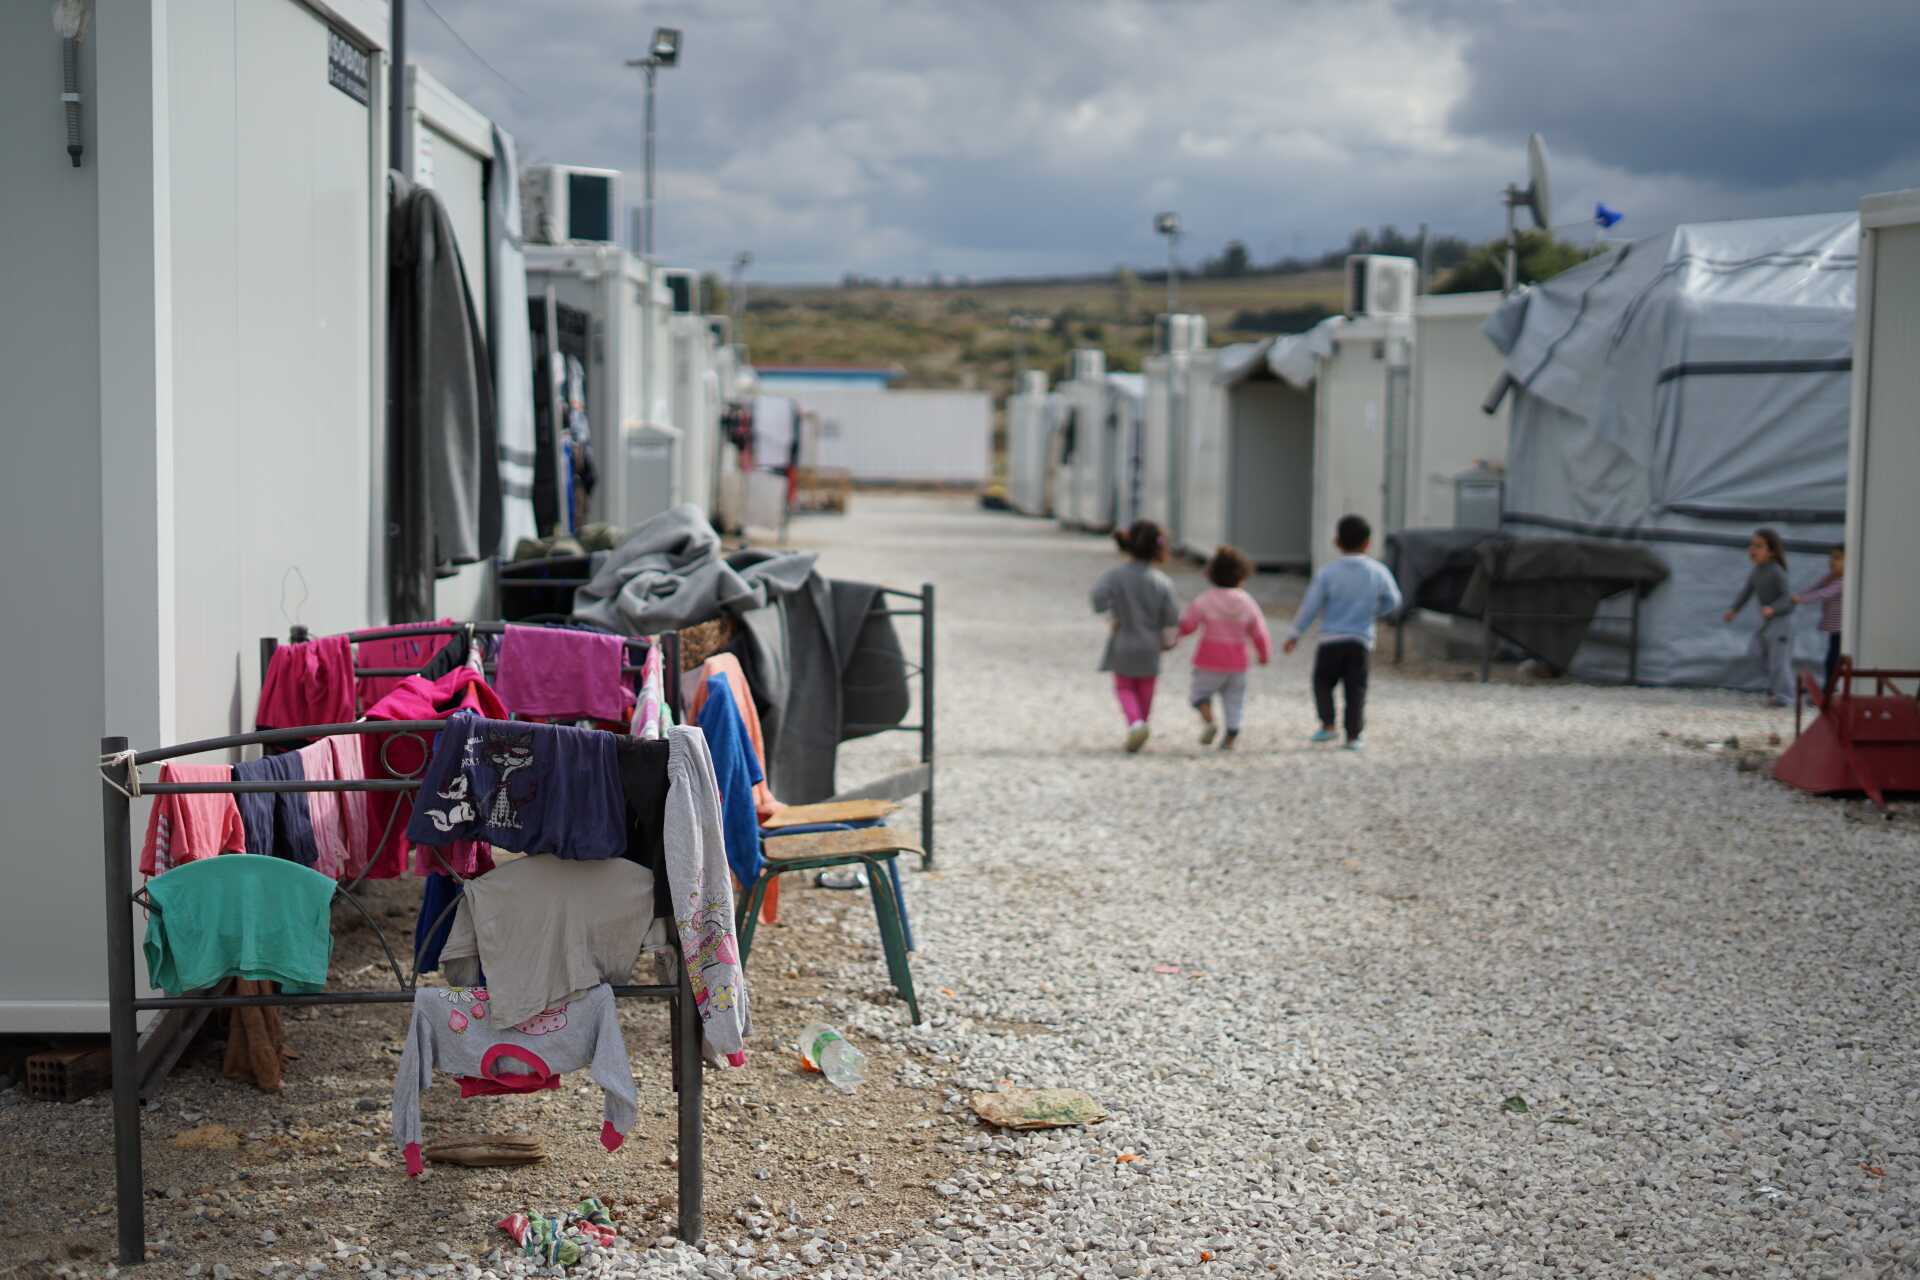 Child refugees in a camp in Greece